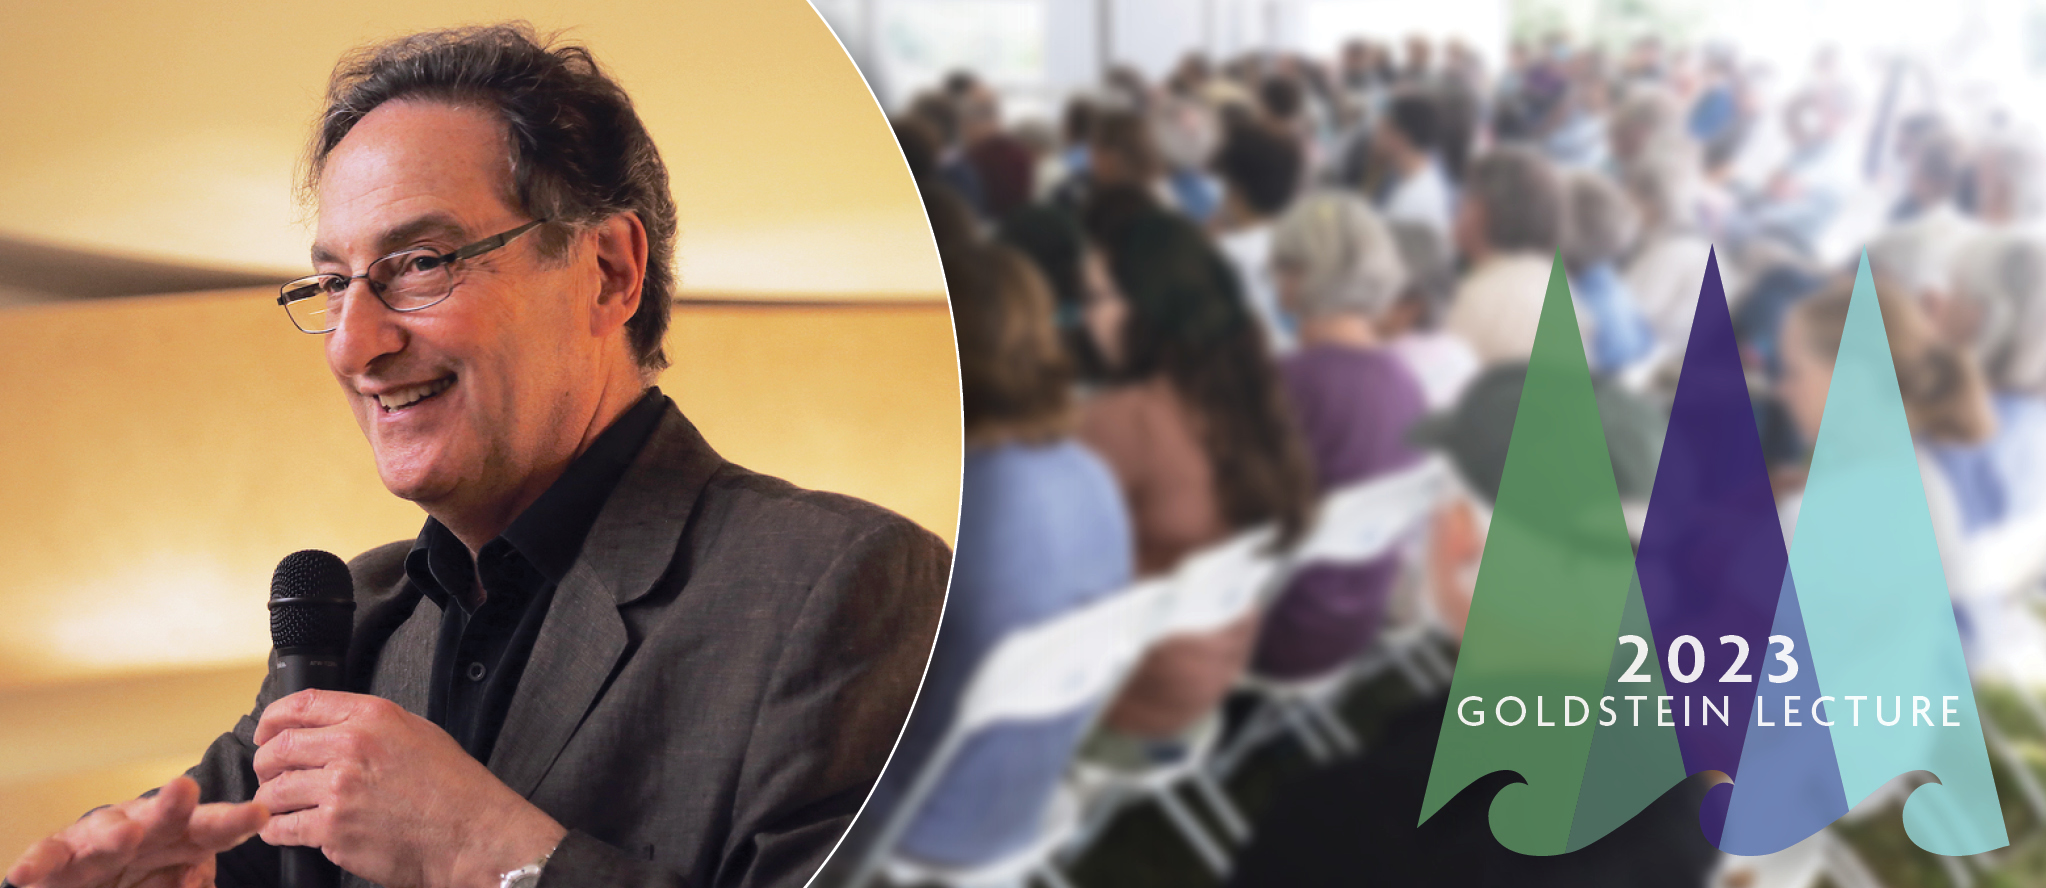 Headshot of Ira Flatow, science communicator, at left. At the right is a blurred photo of a lecture audience, all sitting in folded chairs facing the stage. The Schoodic Institute logo is overlaid, with the words "2023 Goldstein Lecture" featured.